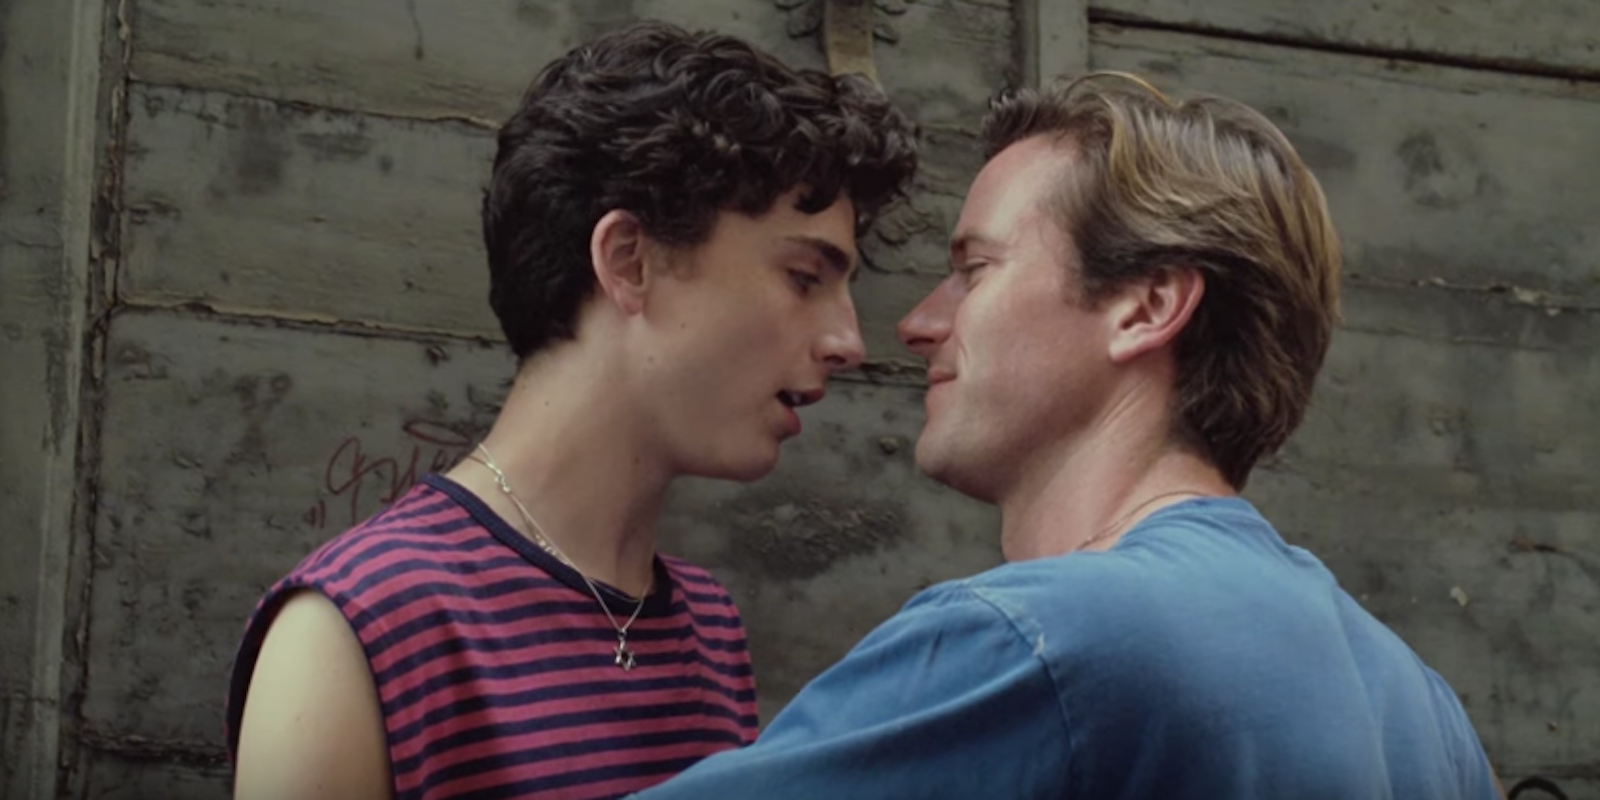 Timothee Chalamet and Armie Hammer embrace